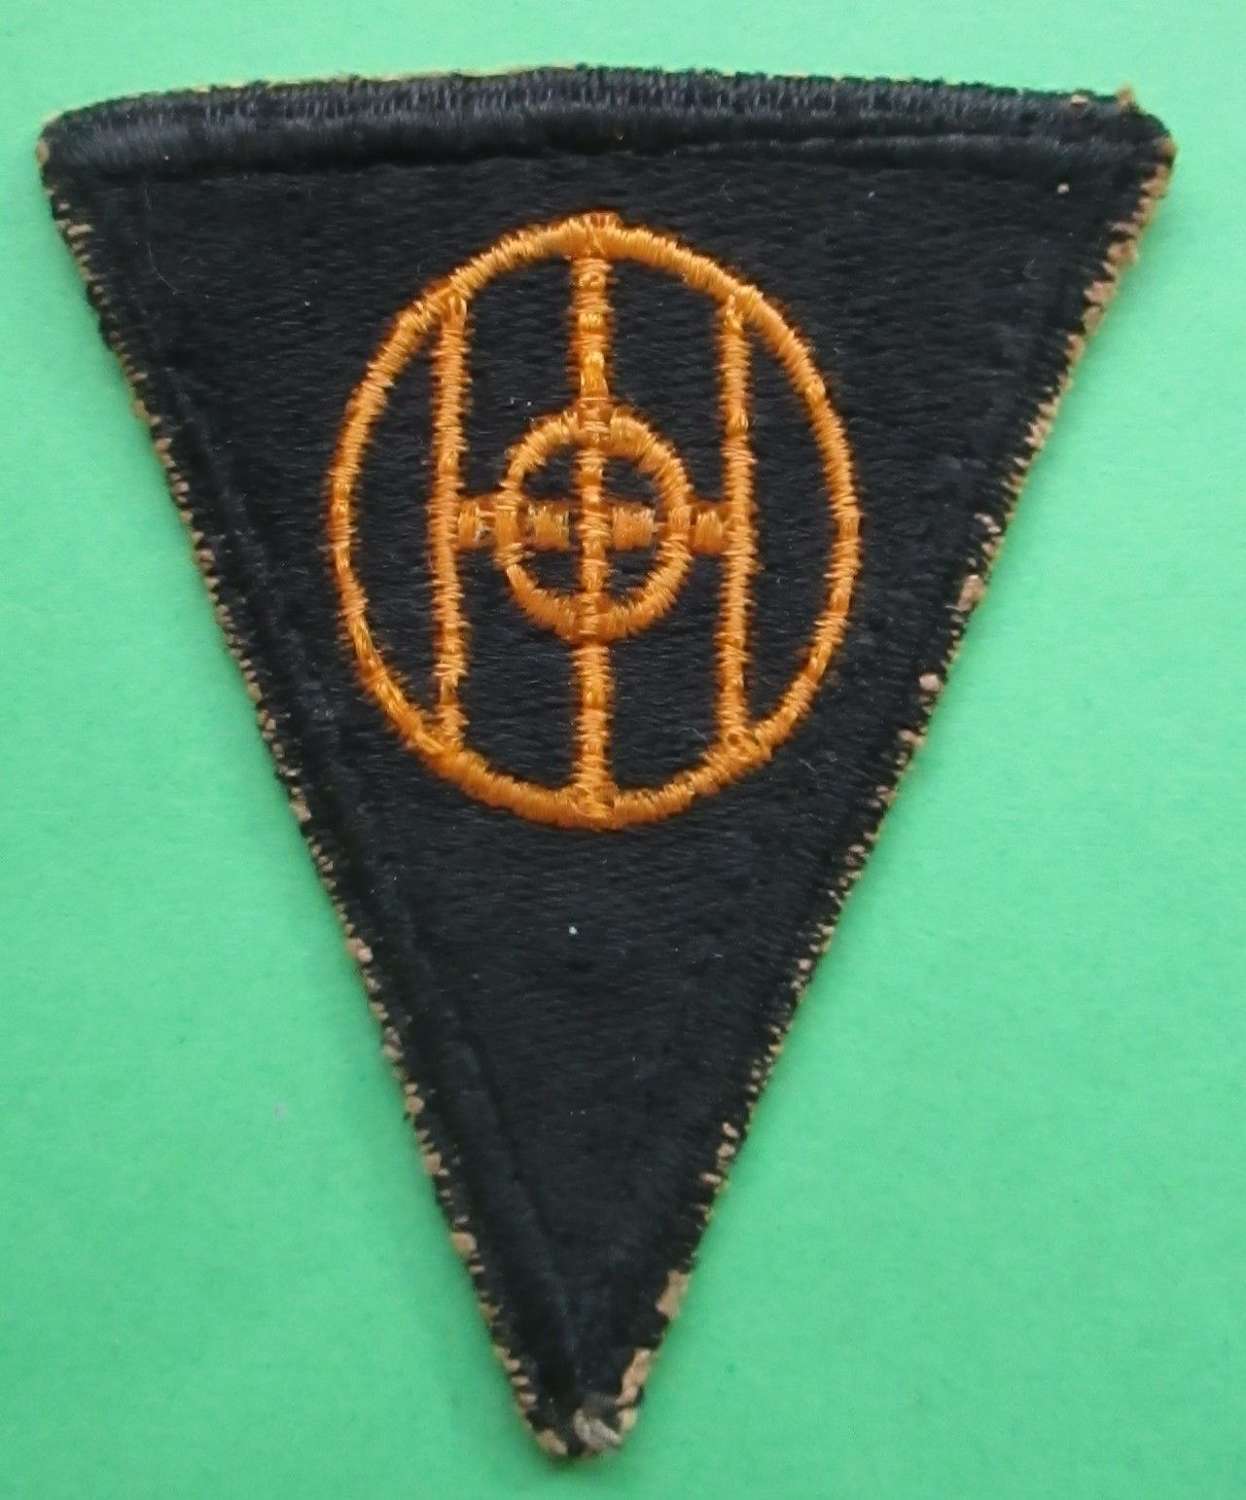 A WWII US 83RD DIVISION FORMATION PATCH